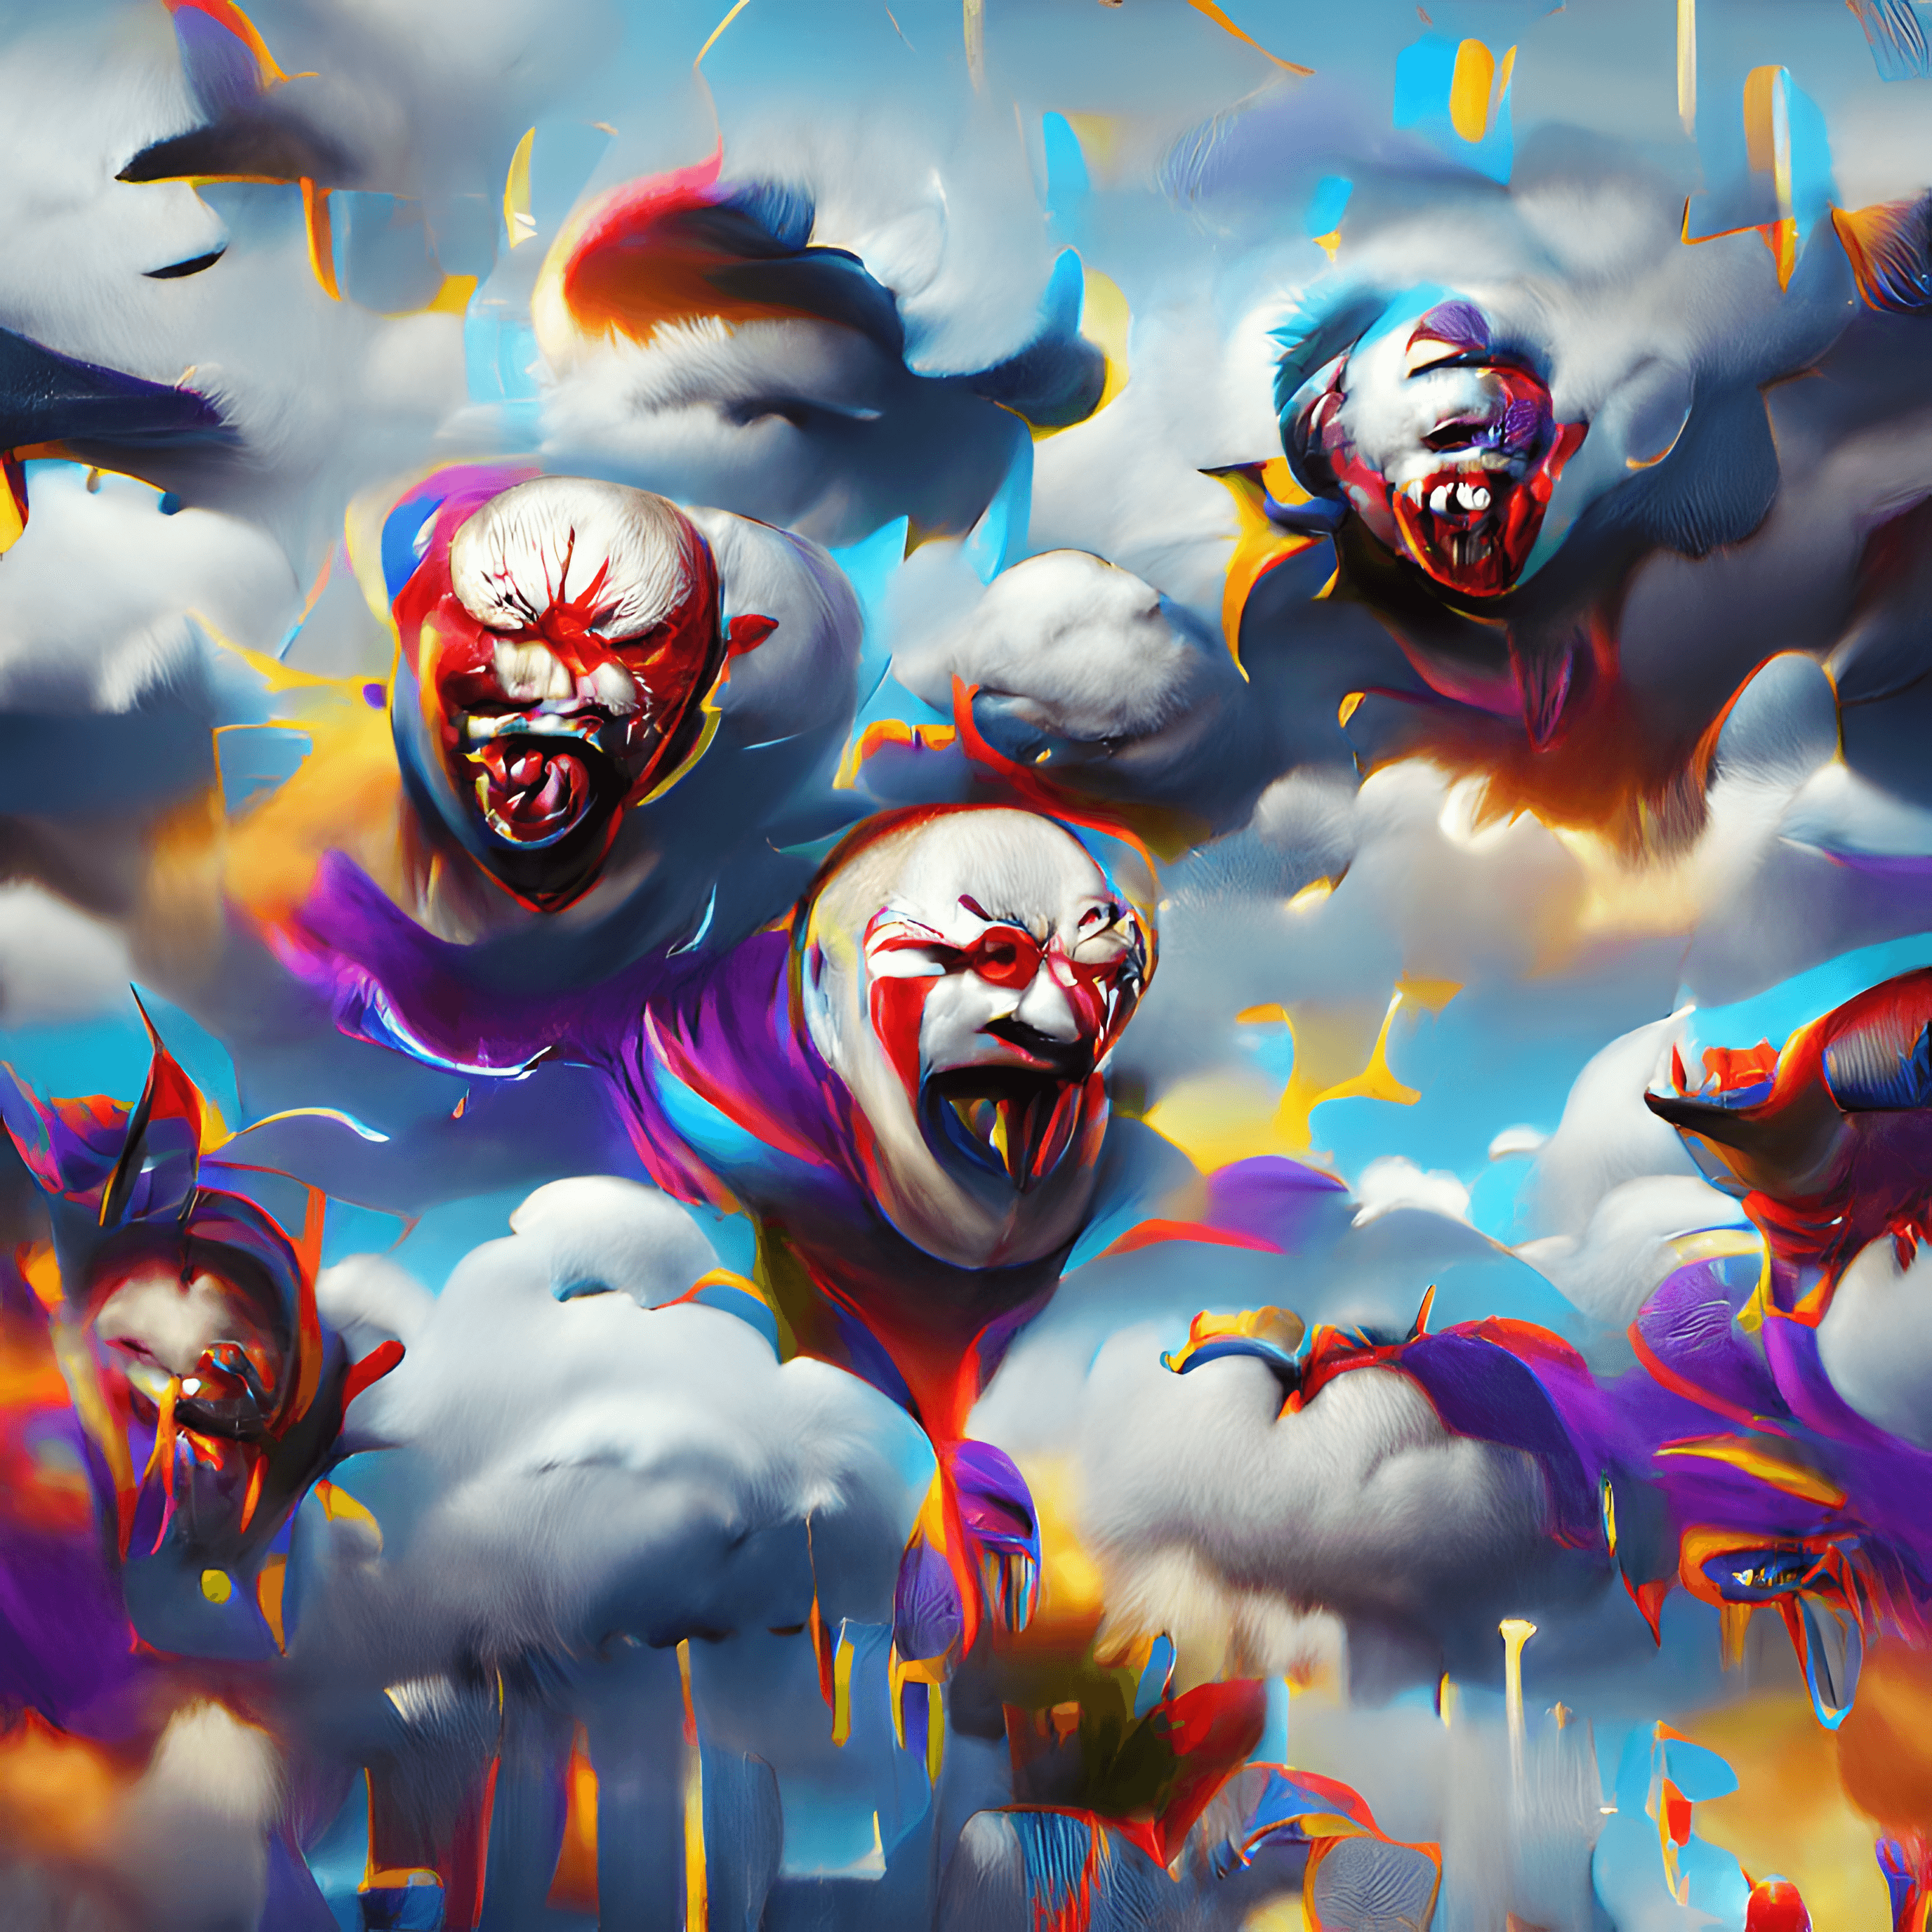 Evil Clown Faces Falling From the Sky